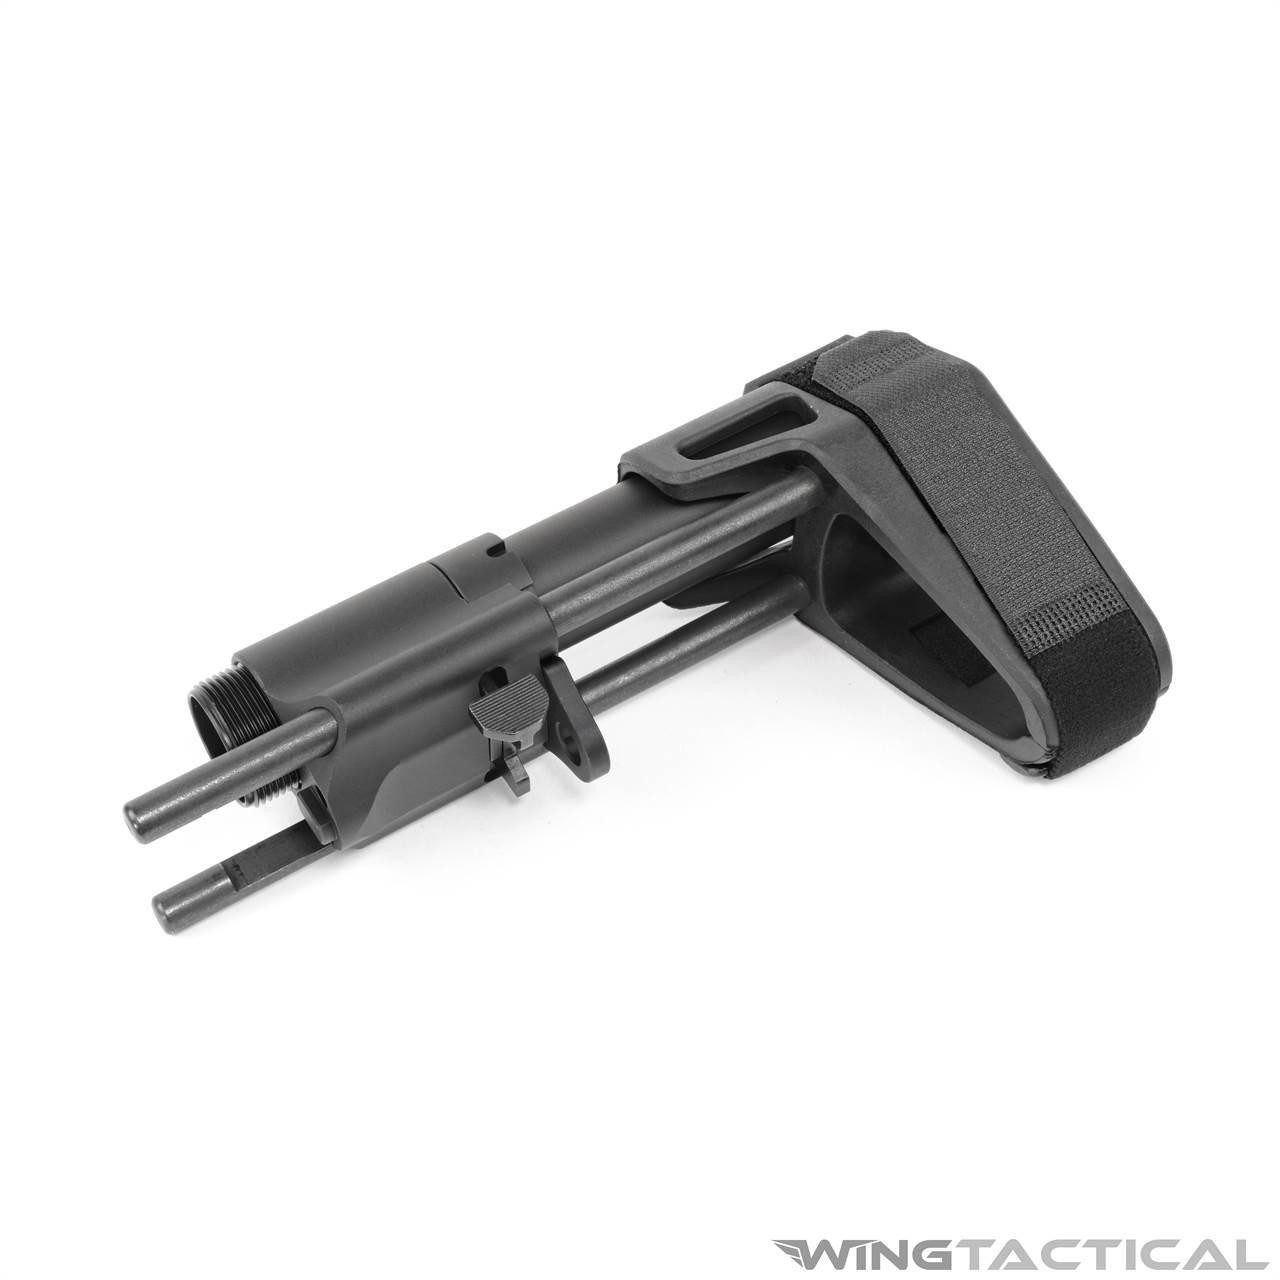 SB Tactical SBPDW Brace for Pistols | Wing Tactical